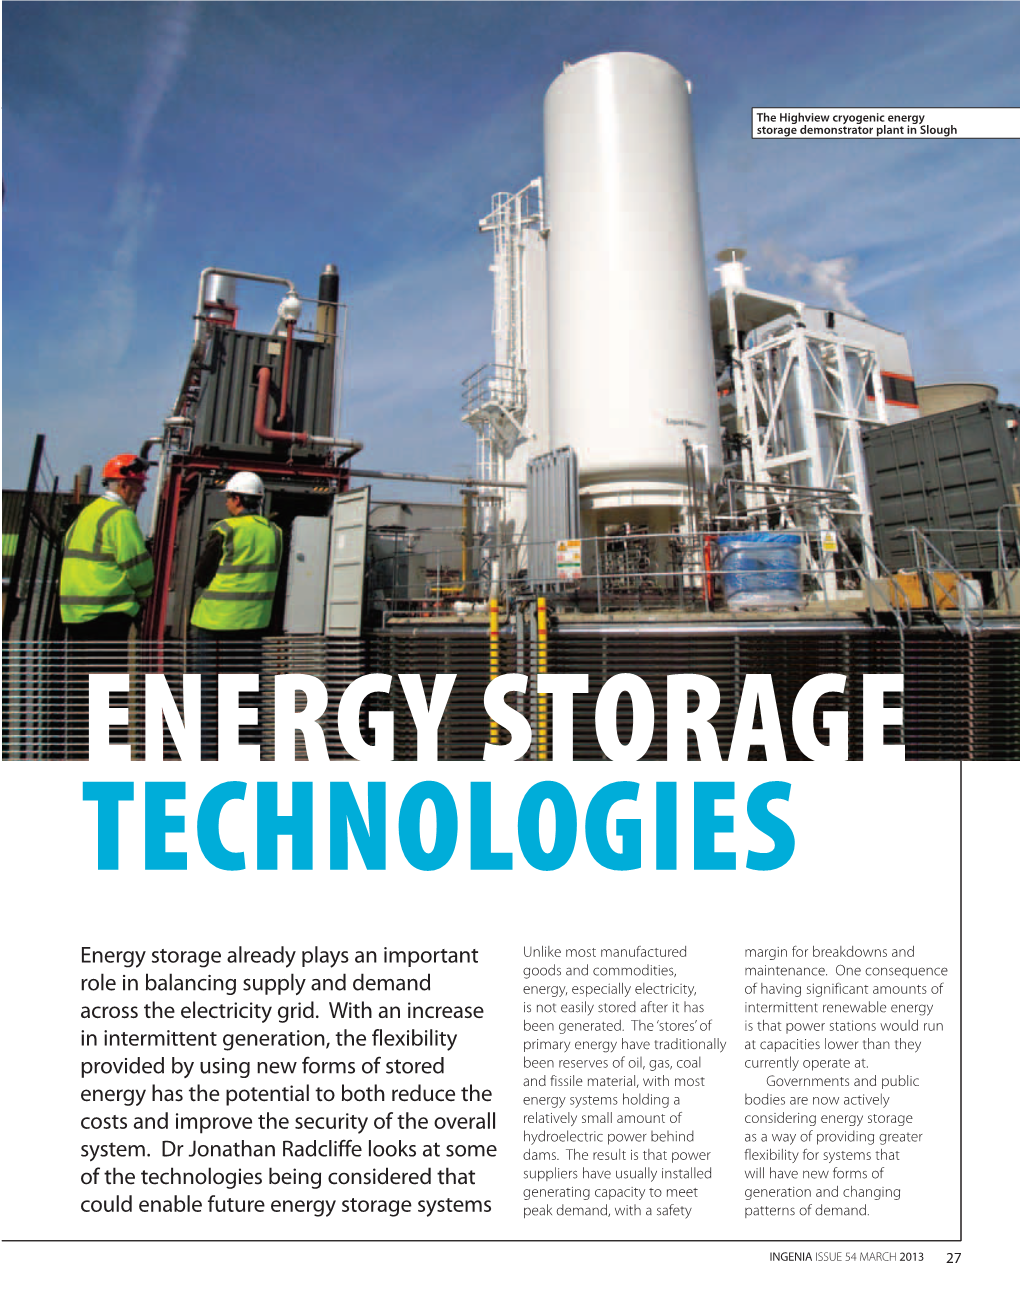 Energy Storage Already Plays an Important Role in Balancing Supply and Demand Across the Electricity Grid. with an Increase In